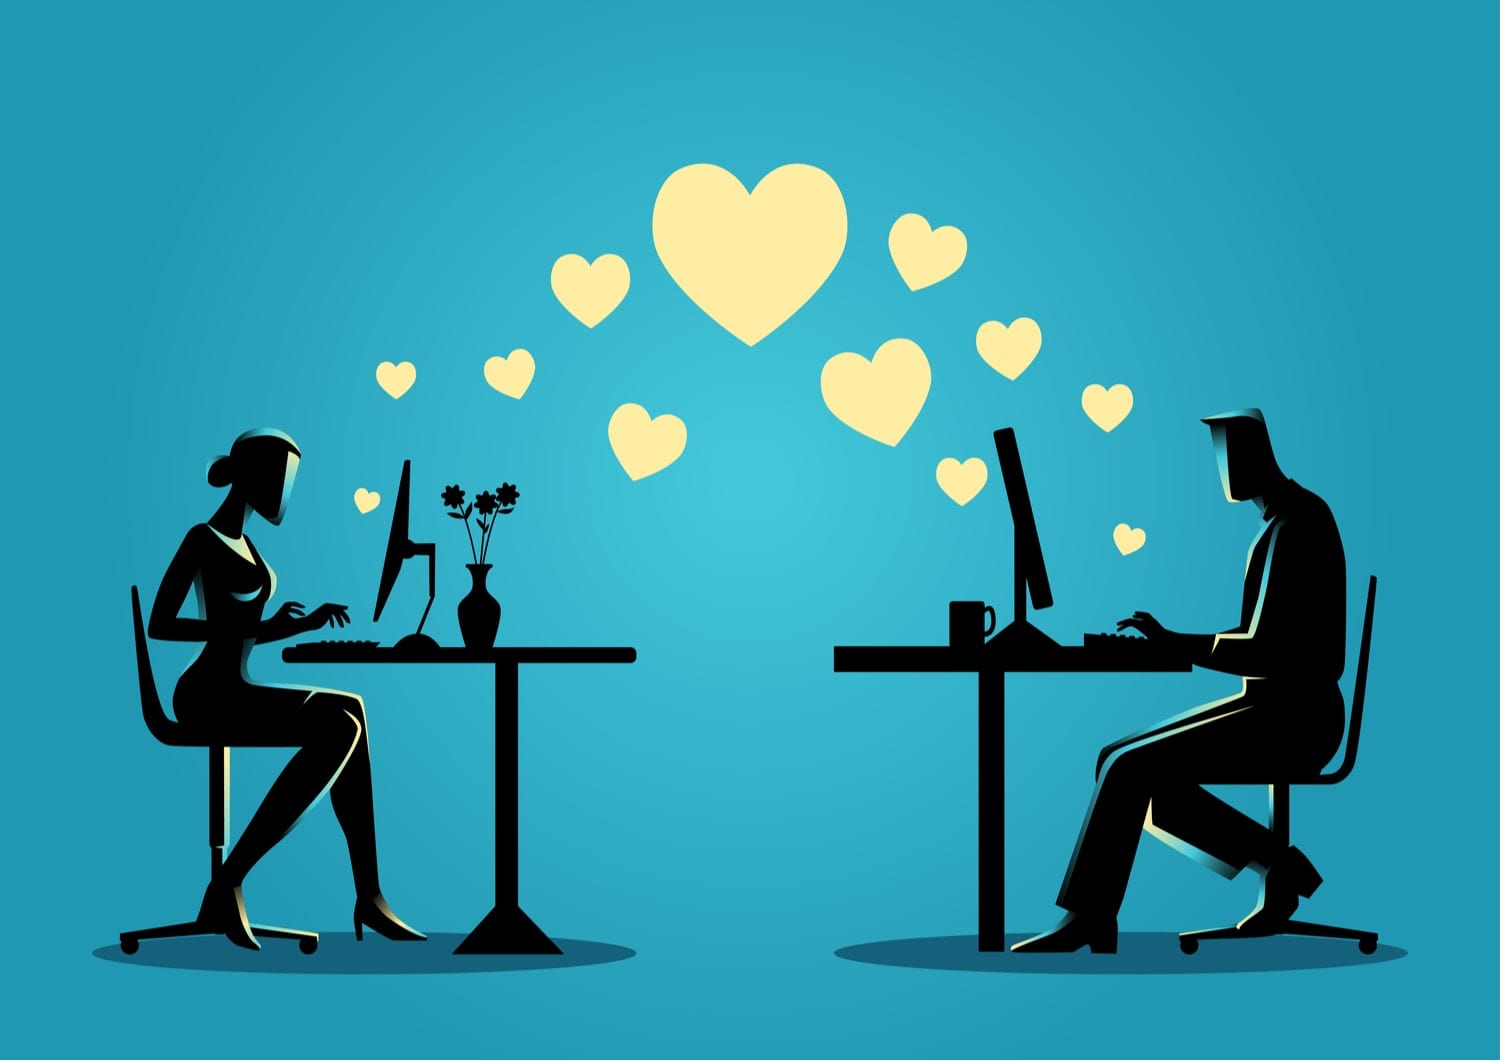 How to prepare yourself for online dating?